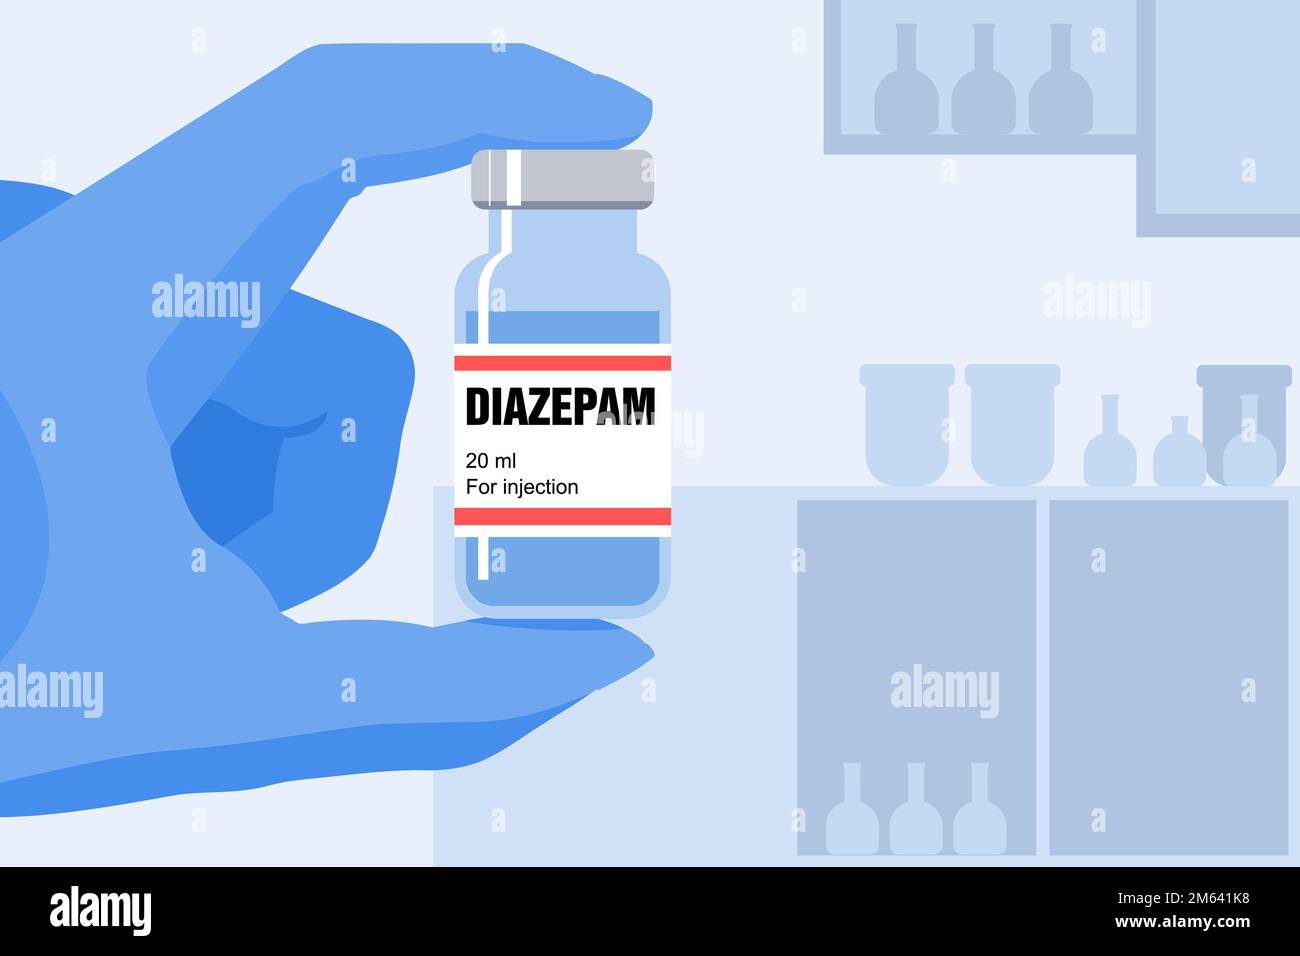 Diazepam generic drug name. It is a benzodiazepine anxiolytic medication, used to treat  anxiety, seizures, alcohol withdrawal syndrome, muscle spasms Stock Vector